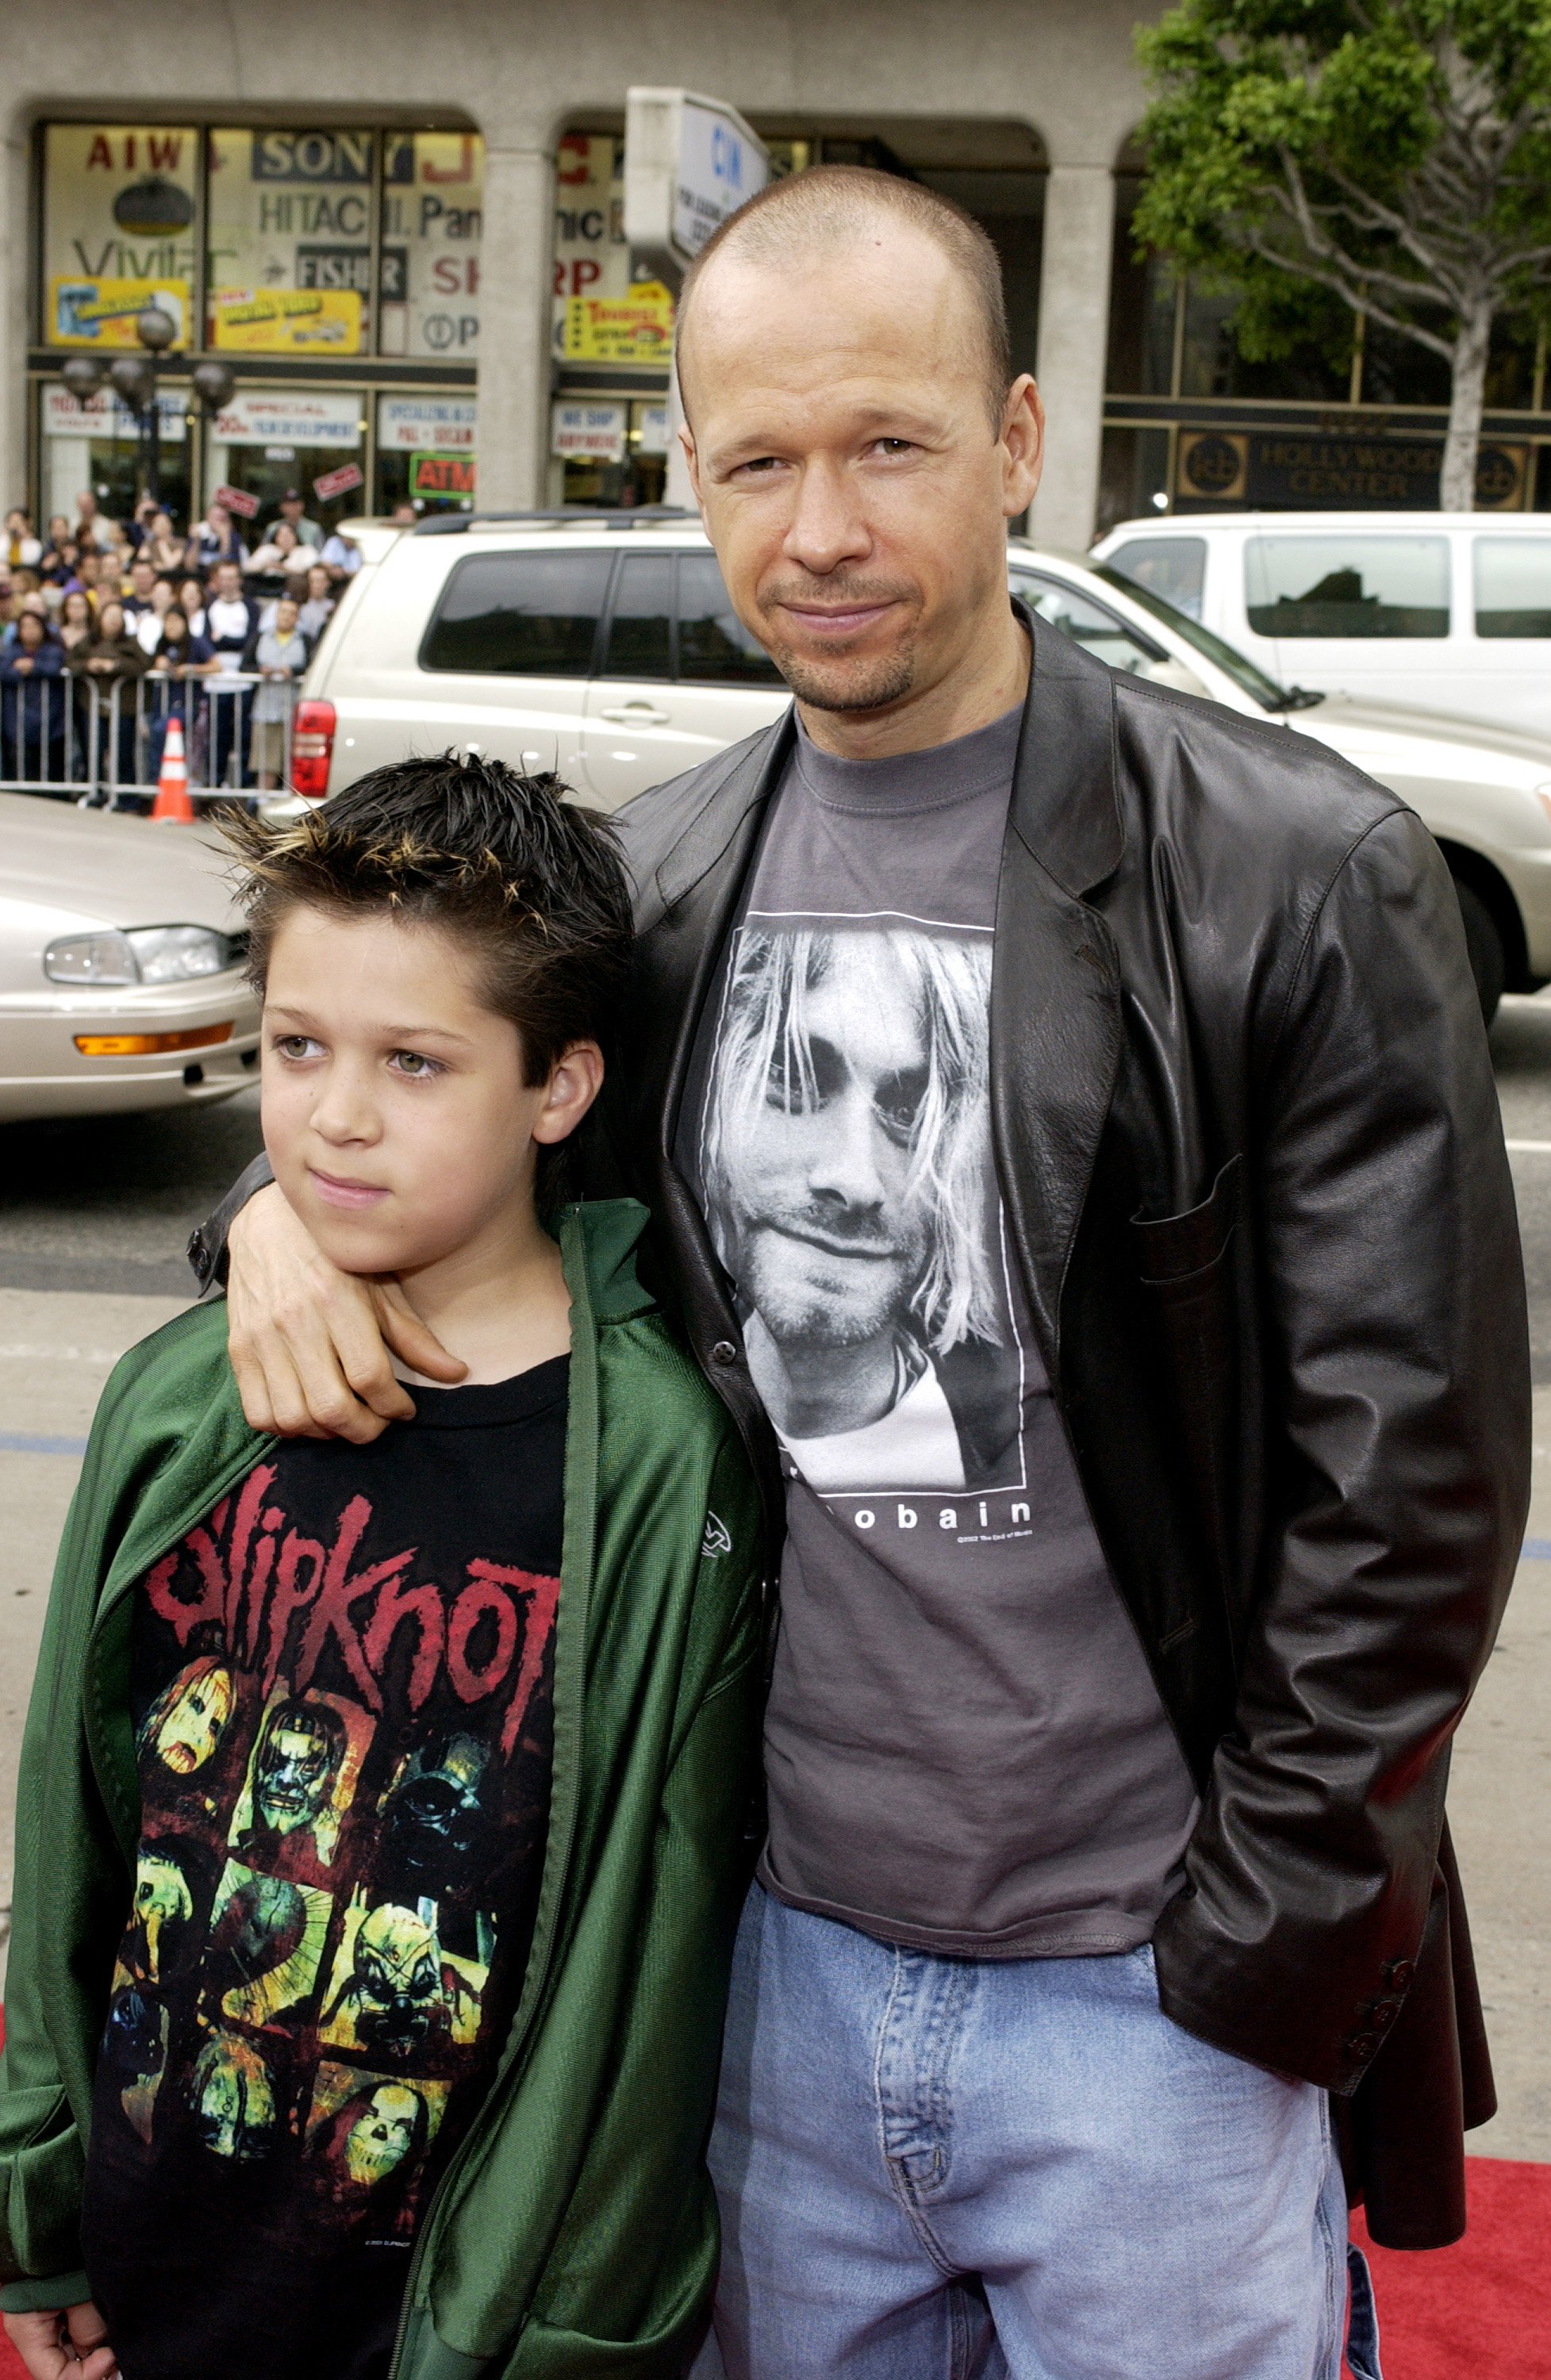 Donnie Wahlberg & son Xavier during "Scooby-Doo" Premiere at Grauman's Chinese Theater in Hollywood on June 8, 2002 | Source: Getty Images